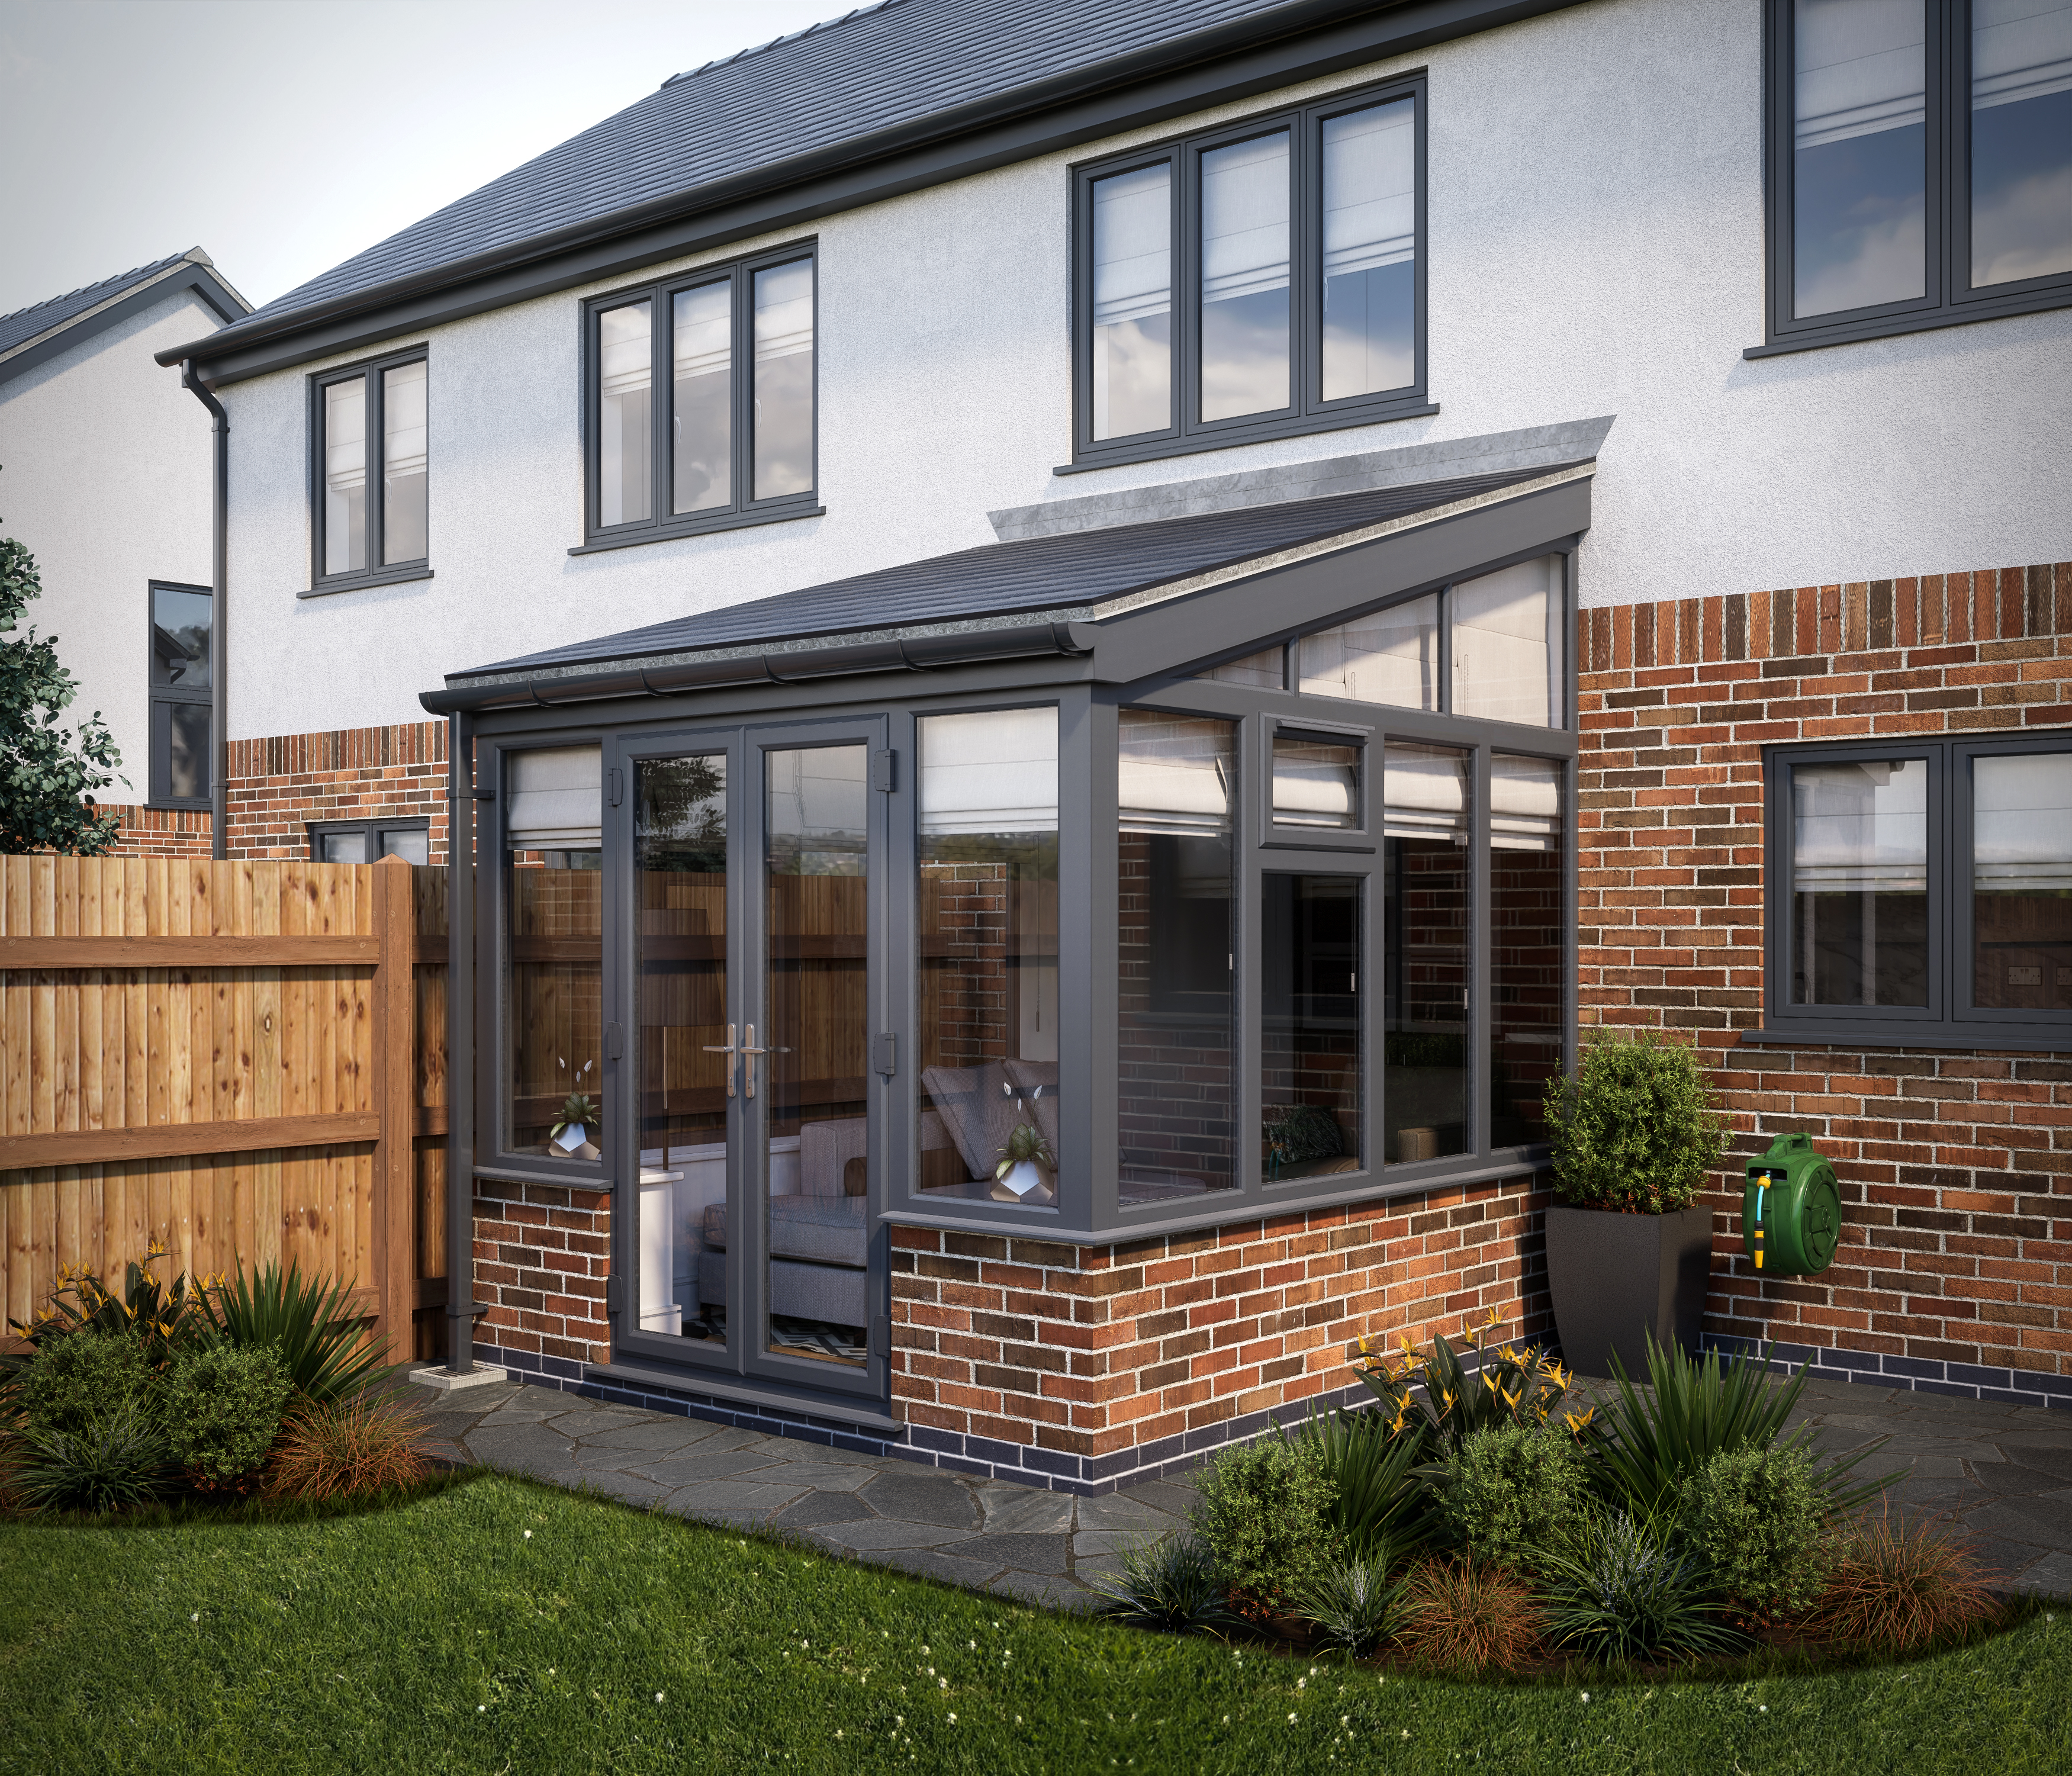 Image of SOLid Roof Lean to Conservatory Grey Frames Dwarf Wall with Titanium Grey Tiles - 13 x 13ft